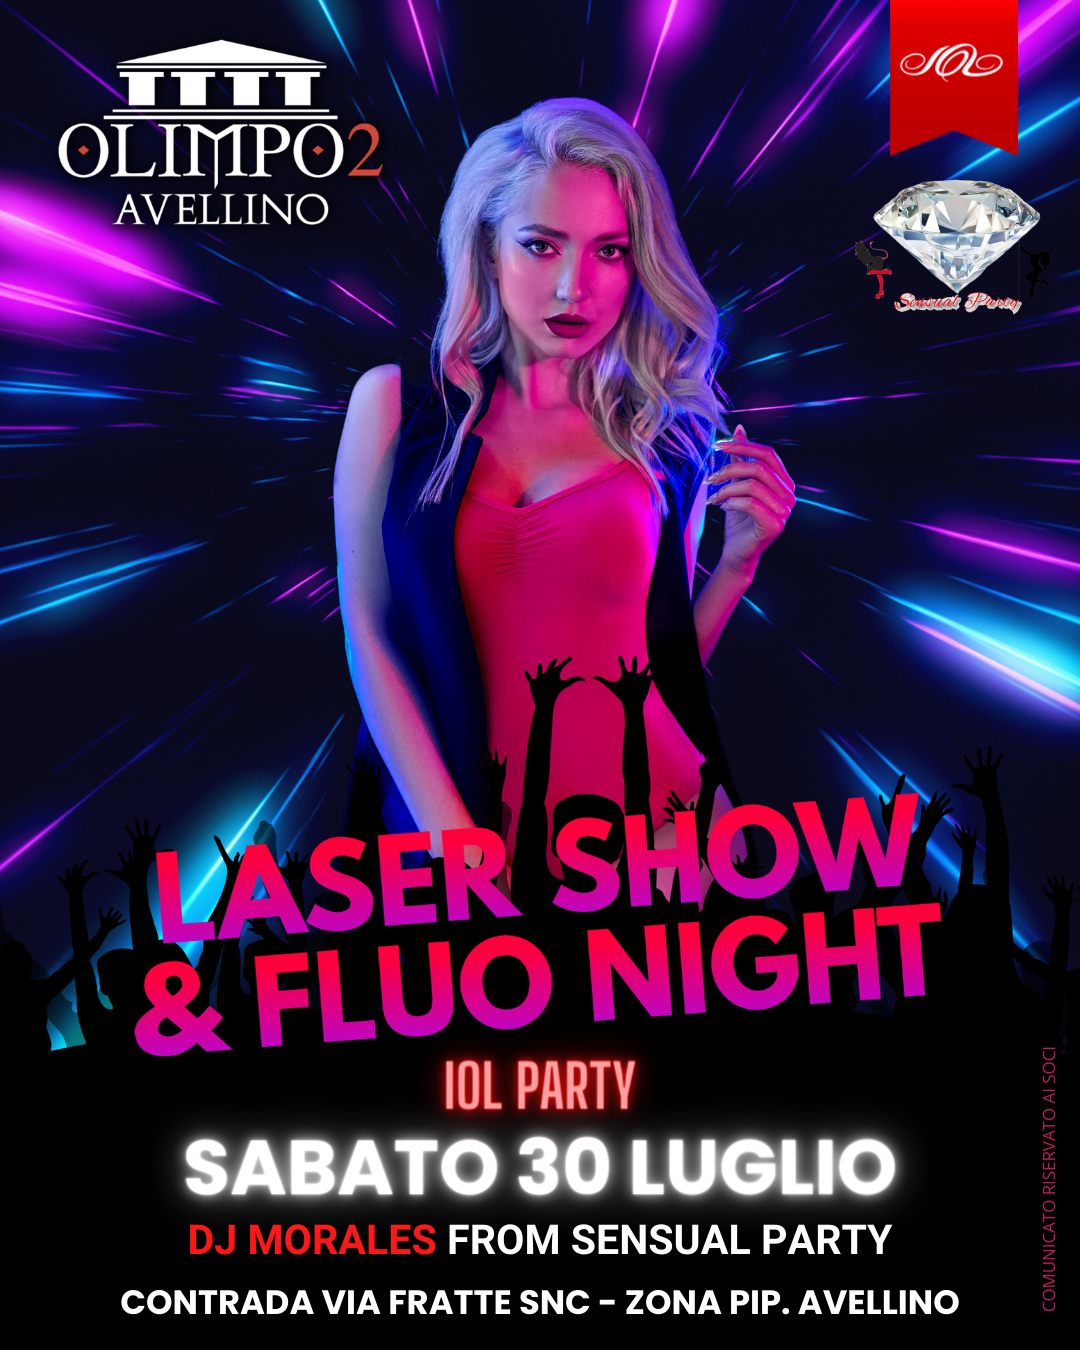 laser show & fluo night iol party olimpo 2 avellino